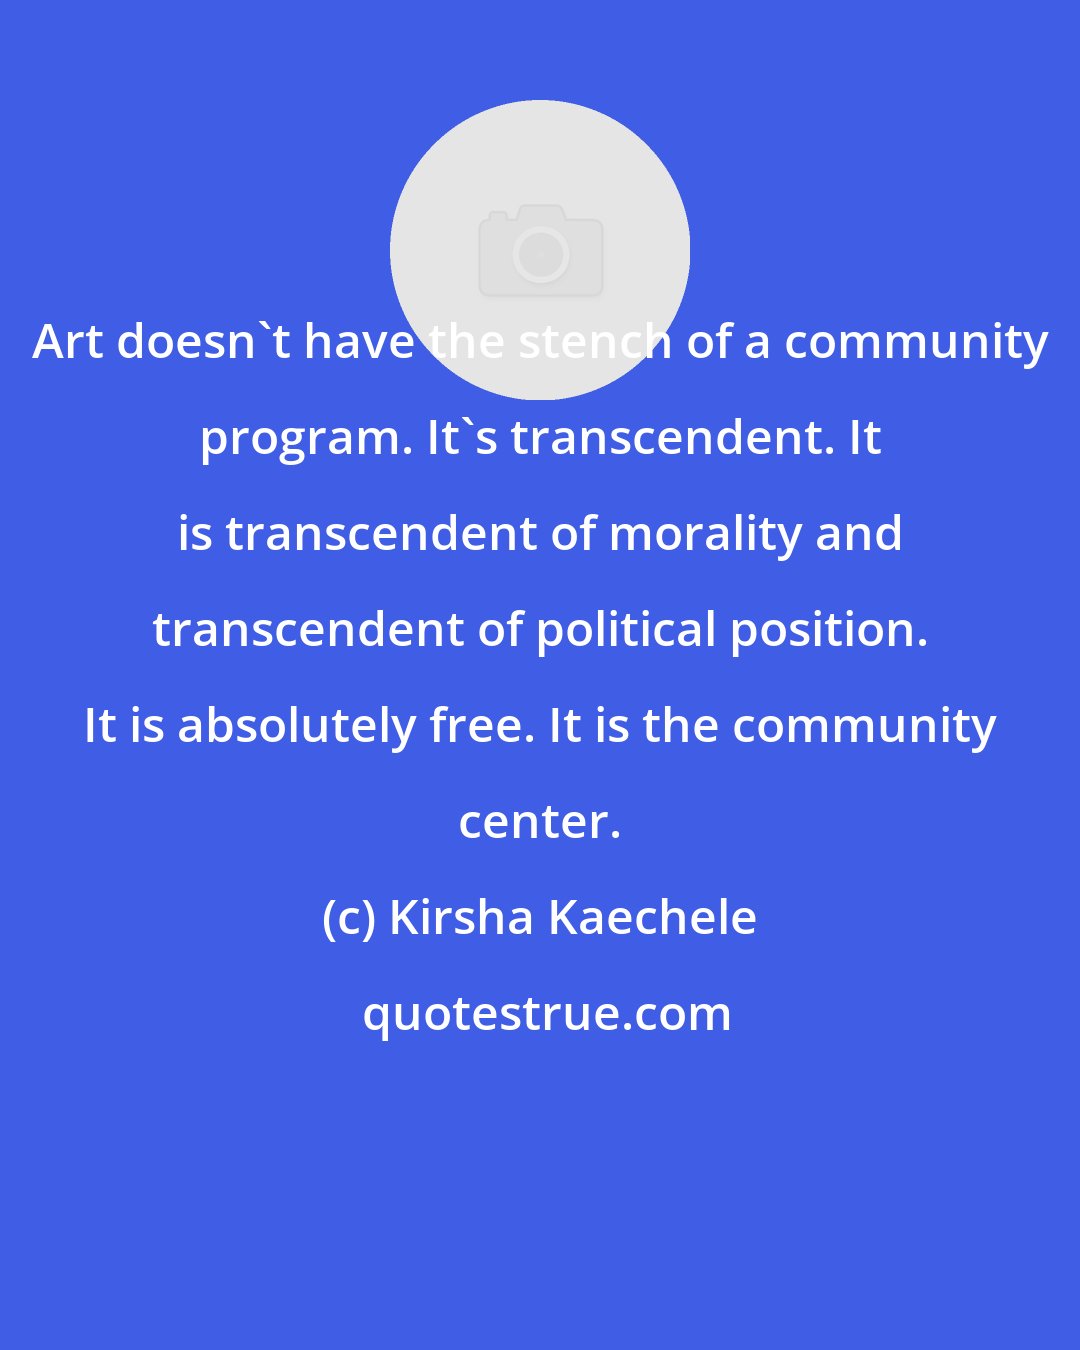 Kirsha Kaechele: Art doesn't have the stench of a community program. It's transcendent. It is transcendent of morality and transcendent of political position. It is absolutely free. It is the community center.